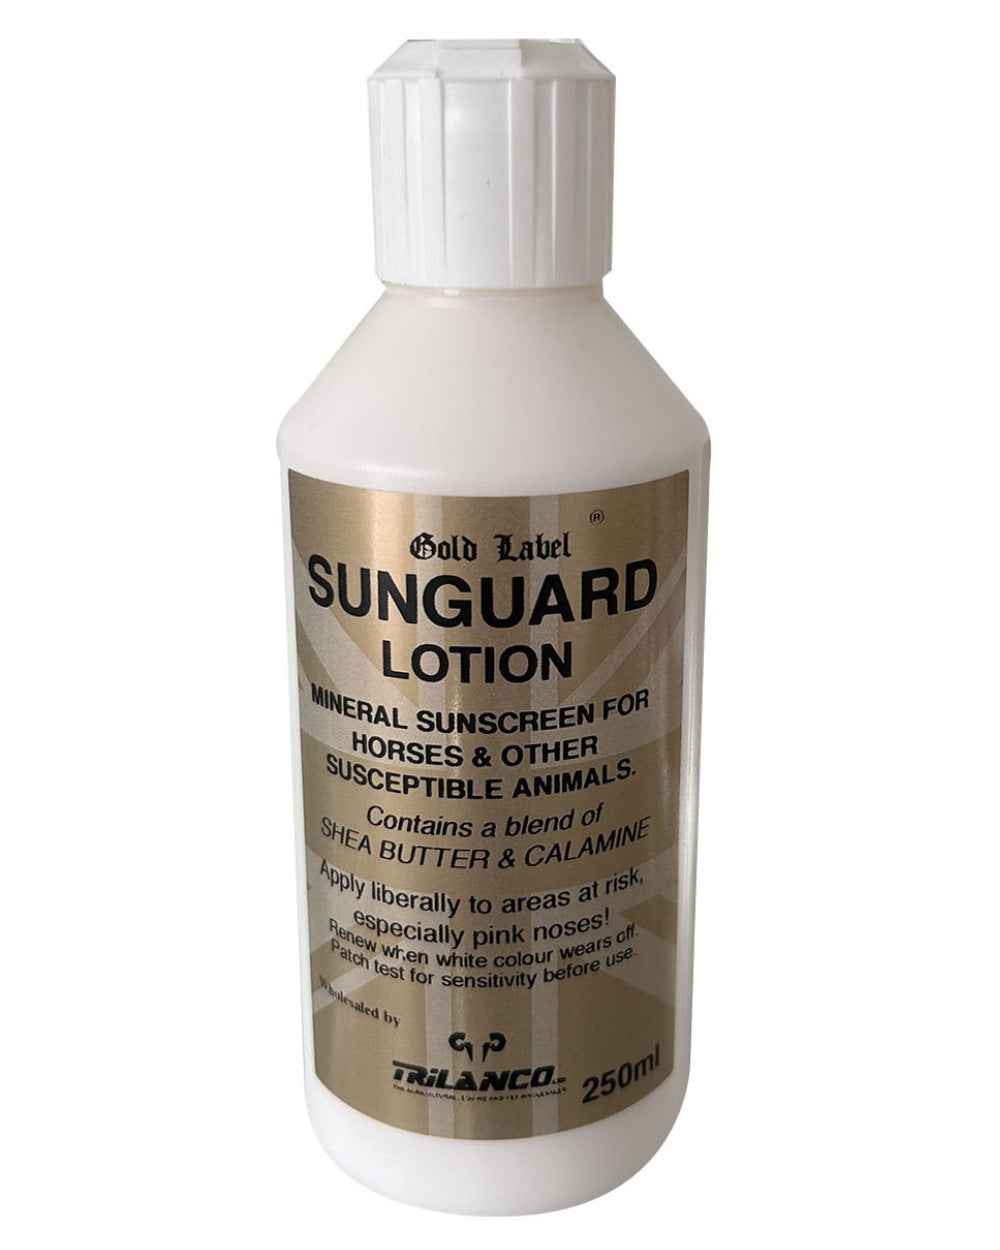 Gold Label Sunguard Lotion On A White Background